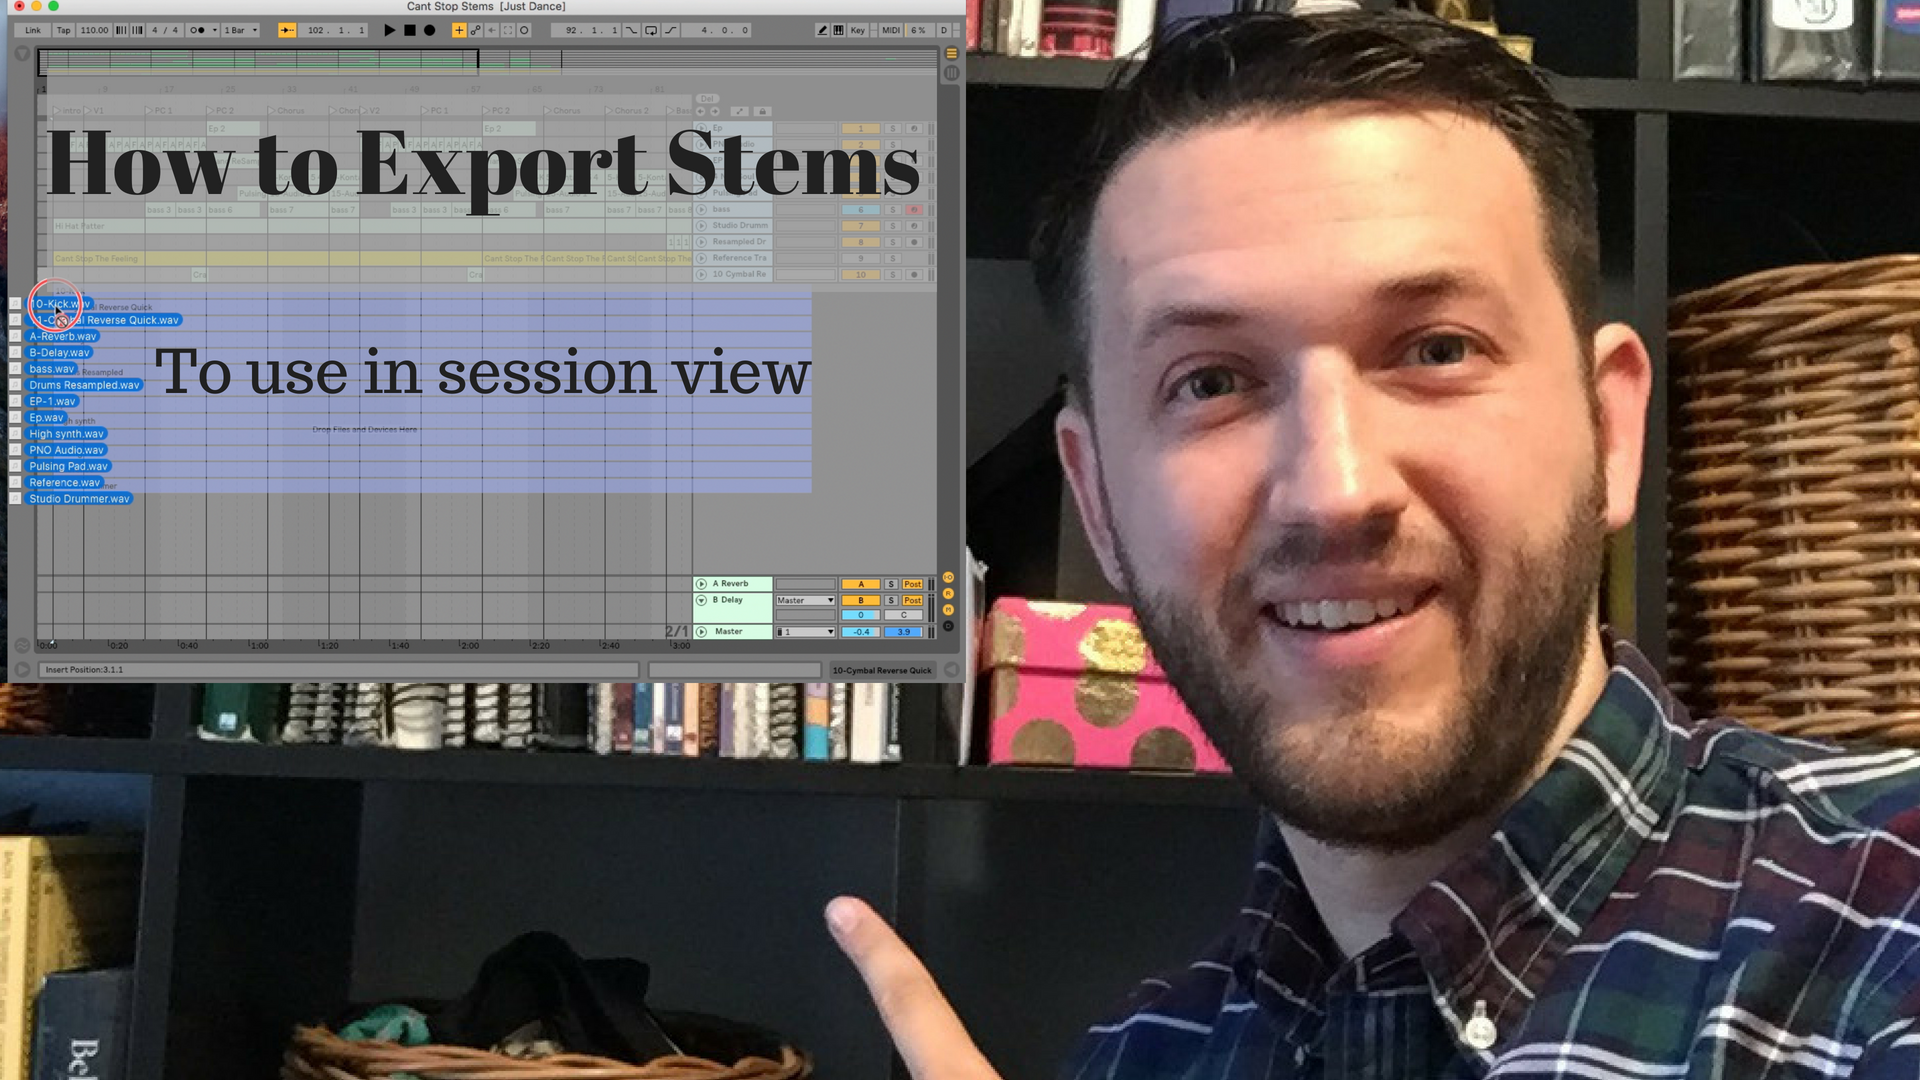 Exporting Stems To Session View